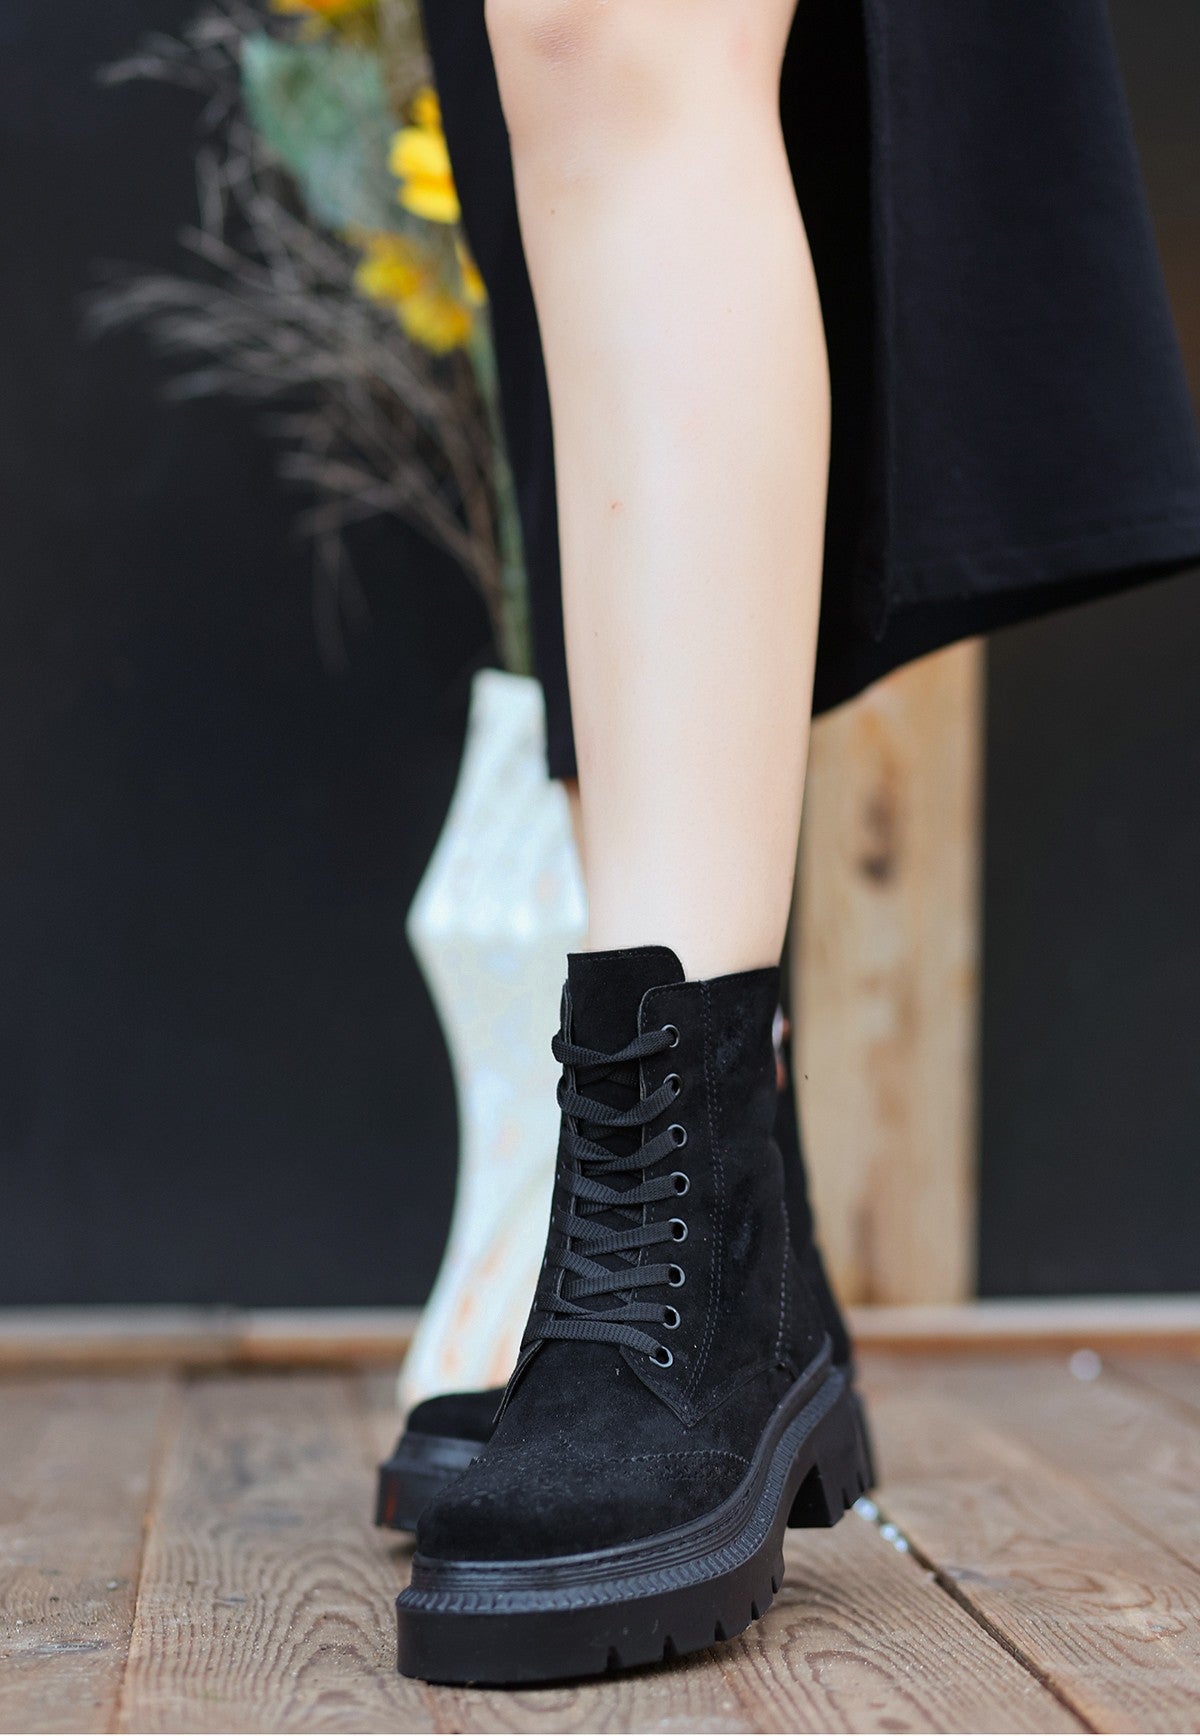 Women's Perf Black Suede Lace-Up Boots - STREETMODE™